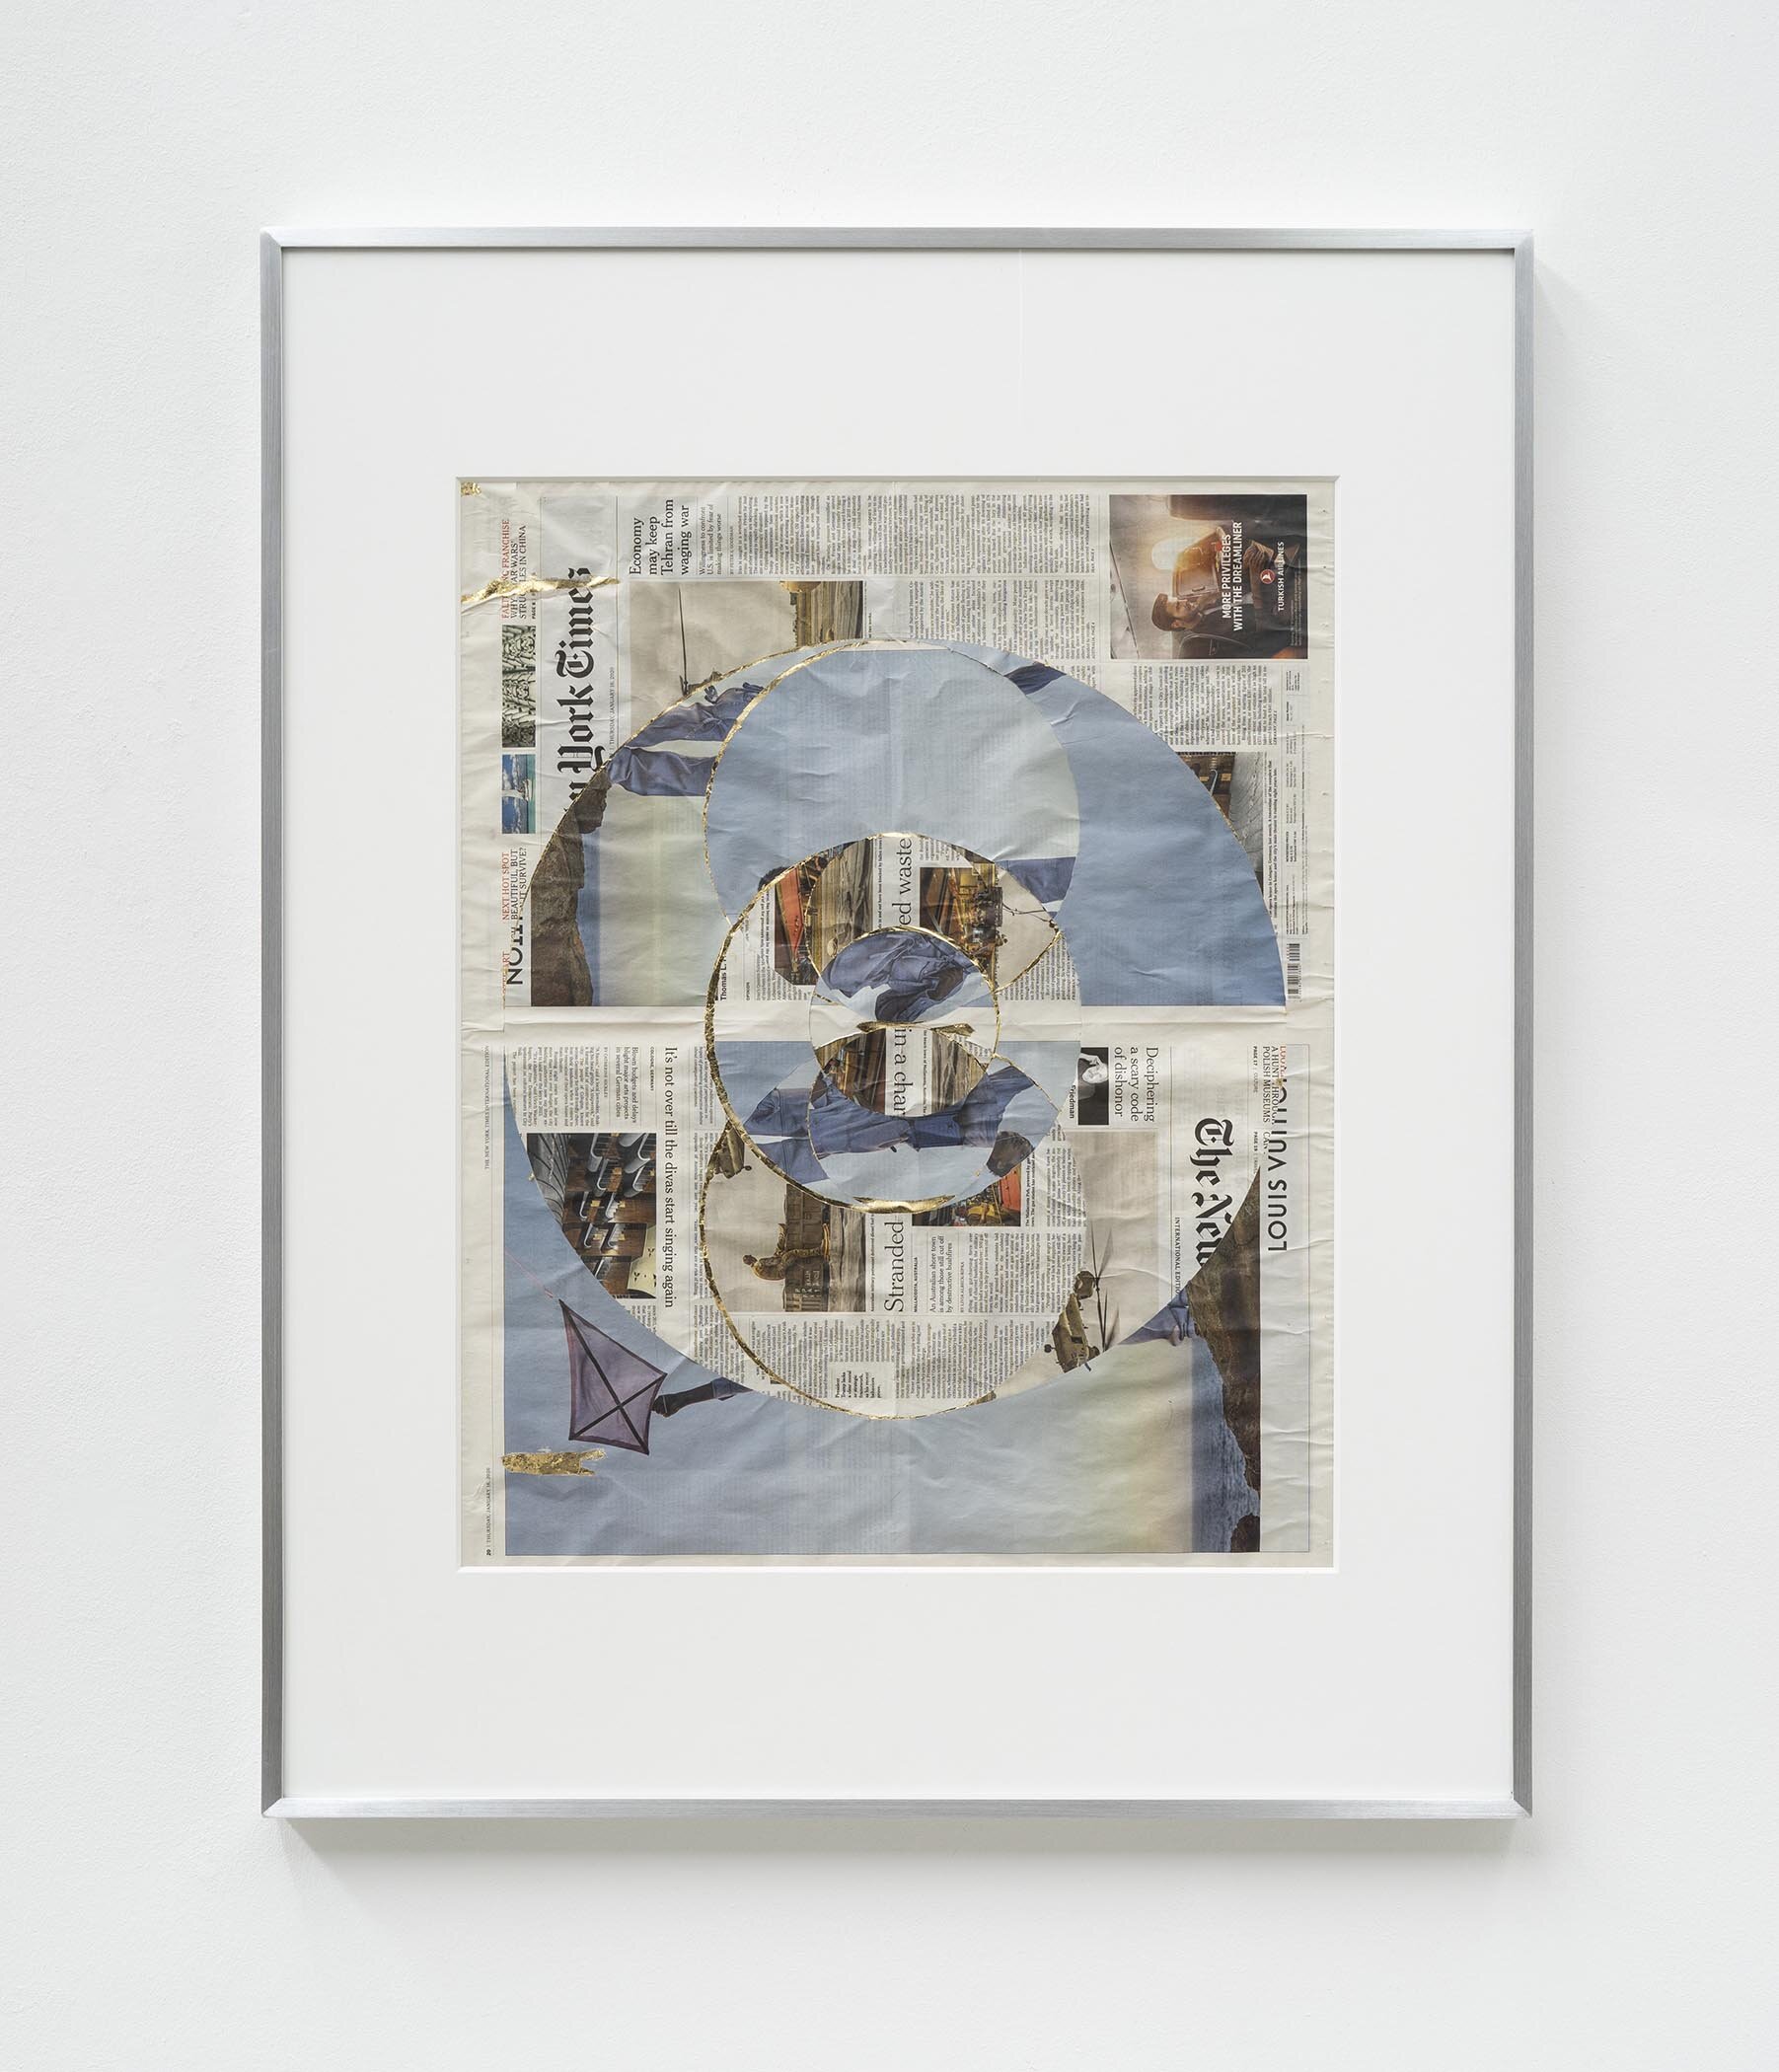   Blind Collage (Three 180º Rotations, The New York Times, January 16, 2020)    2020   Newspaper, tape, and 22 karat gold leaf  39 1/8 x 31 1/4 inches  Exhibition:  Standard Deviations, 2020  